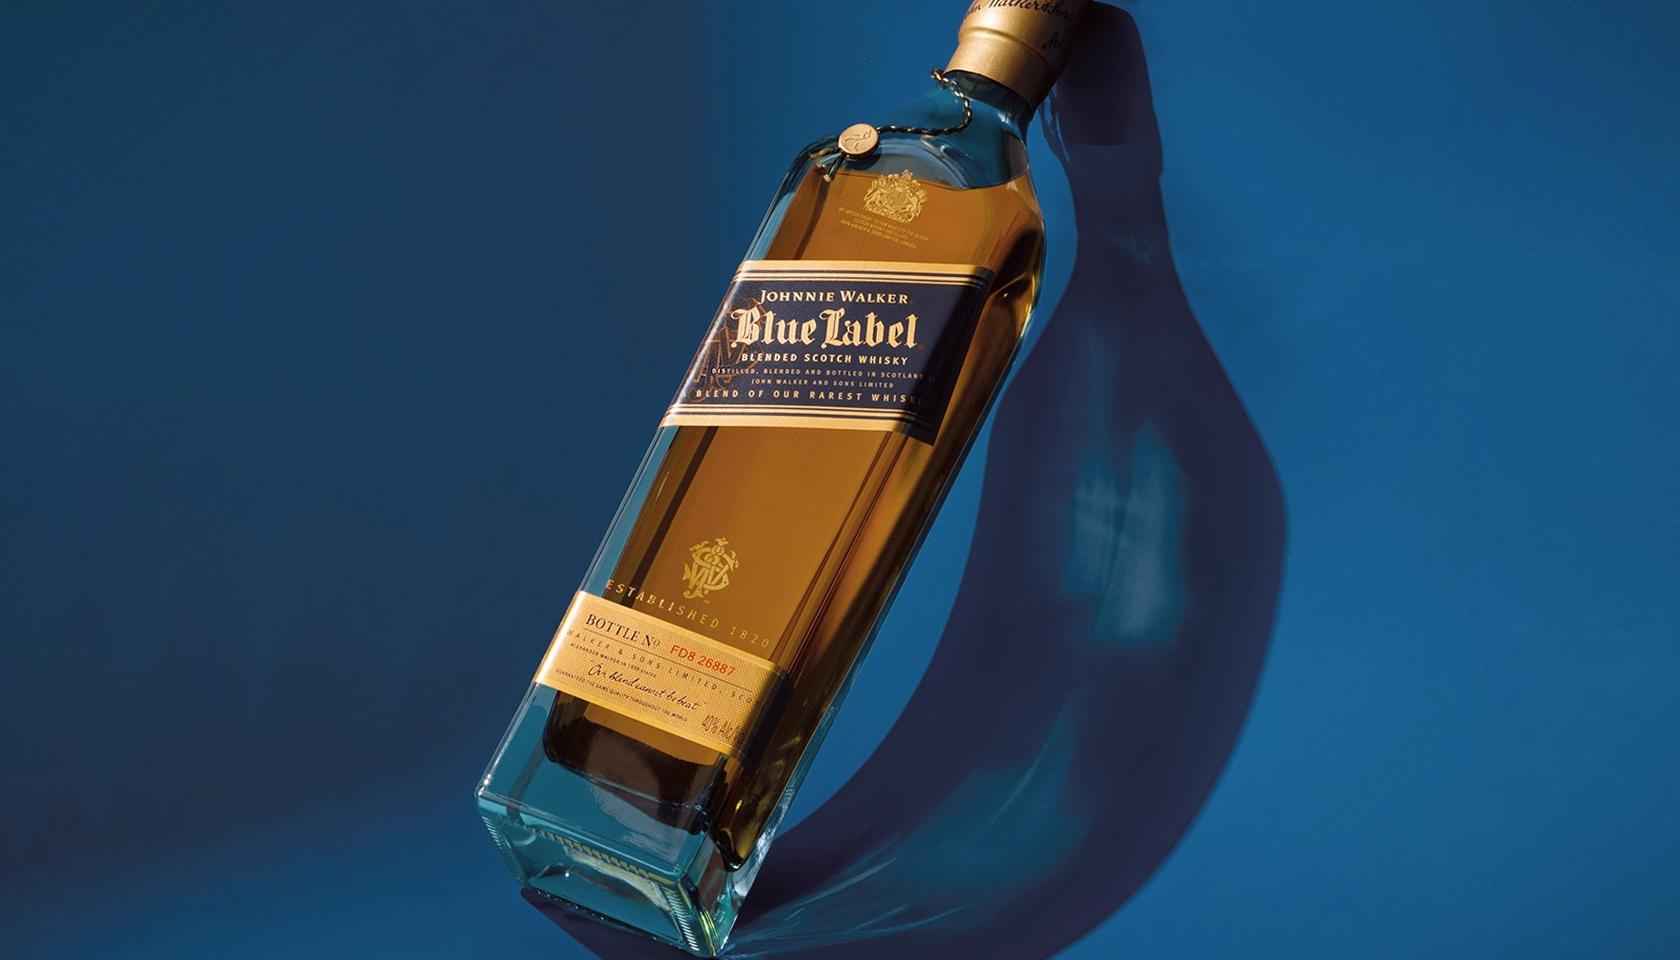 Johnnie Walker Blue Label Scotch Whisky | Exquisite Wine & Alcohol Gift Delivery Toronto Canada | Vyno